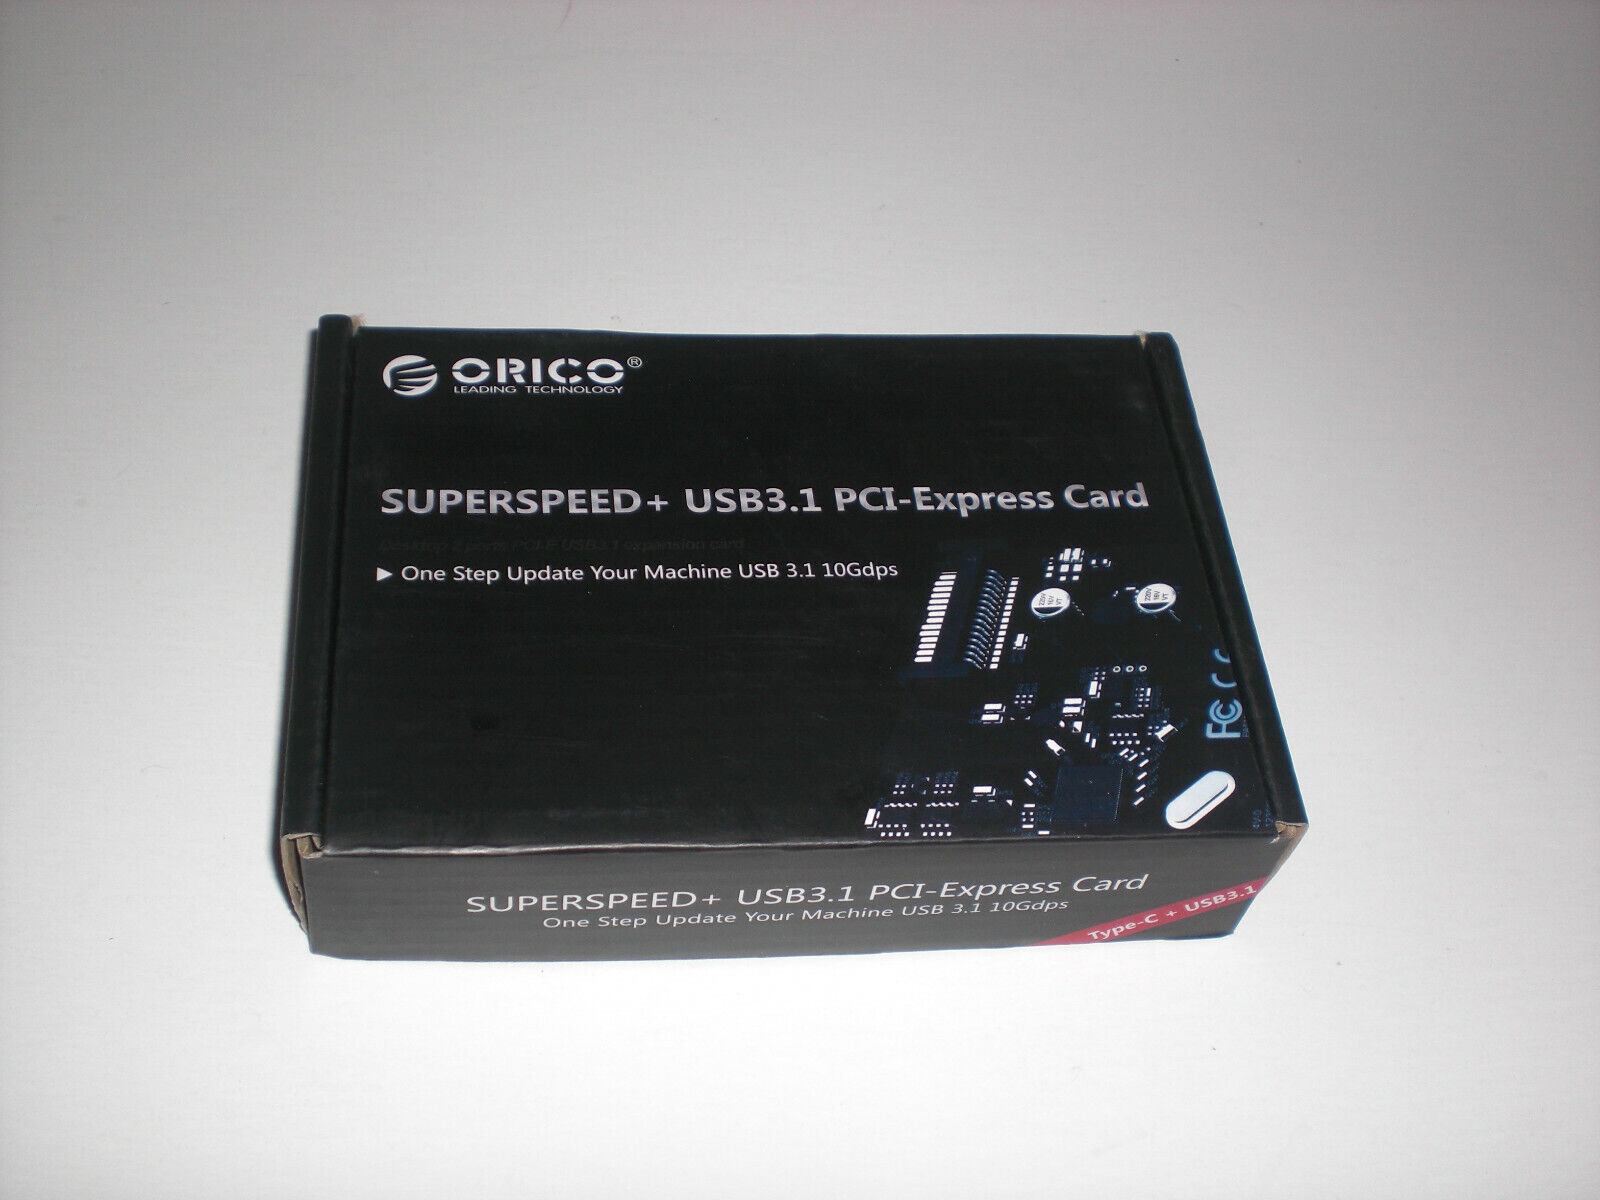 ORICO Superspeed+ USB3.1 PCI-Express Card 10Gbps - New